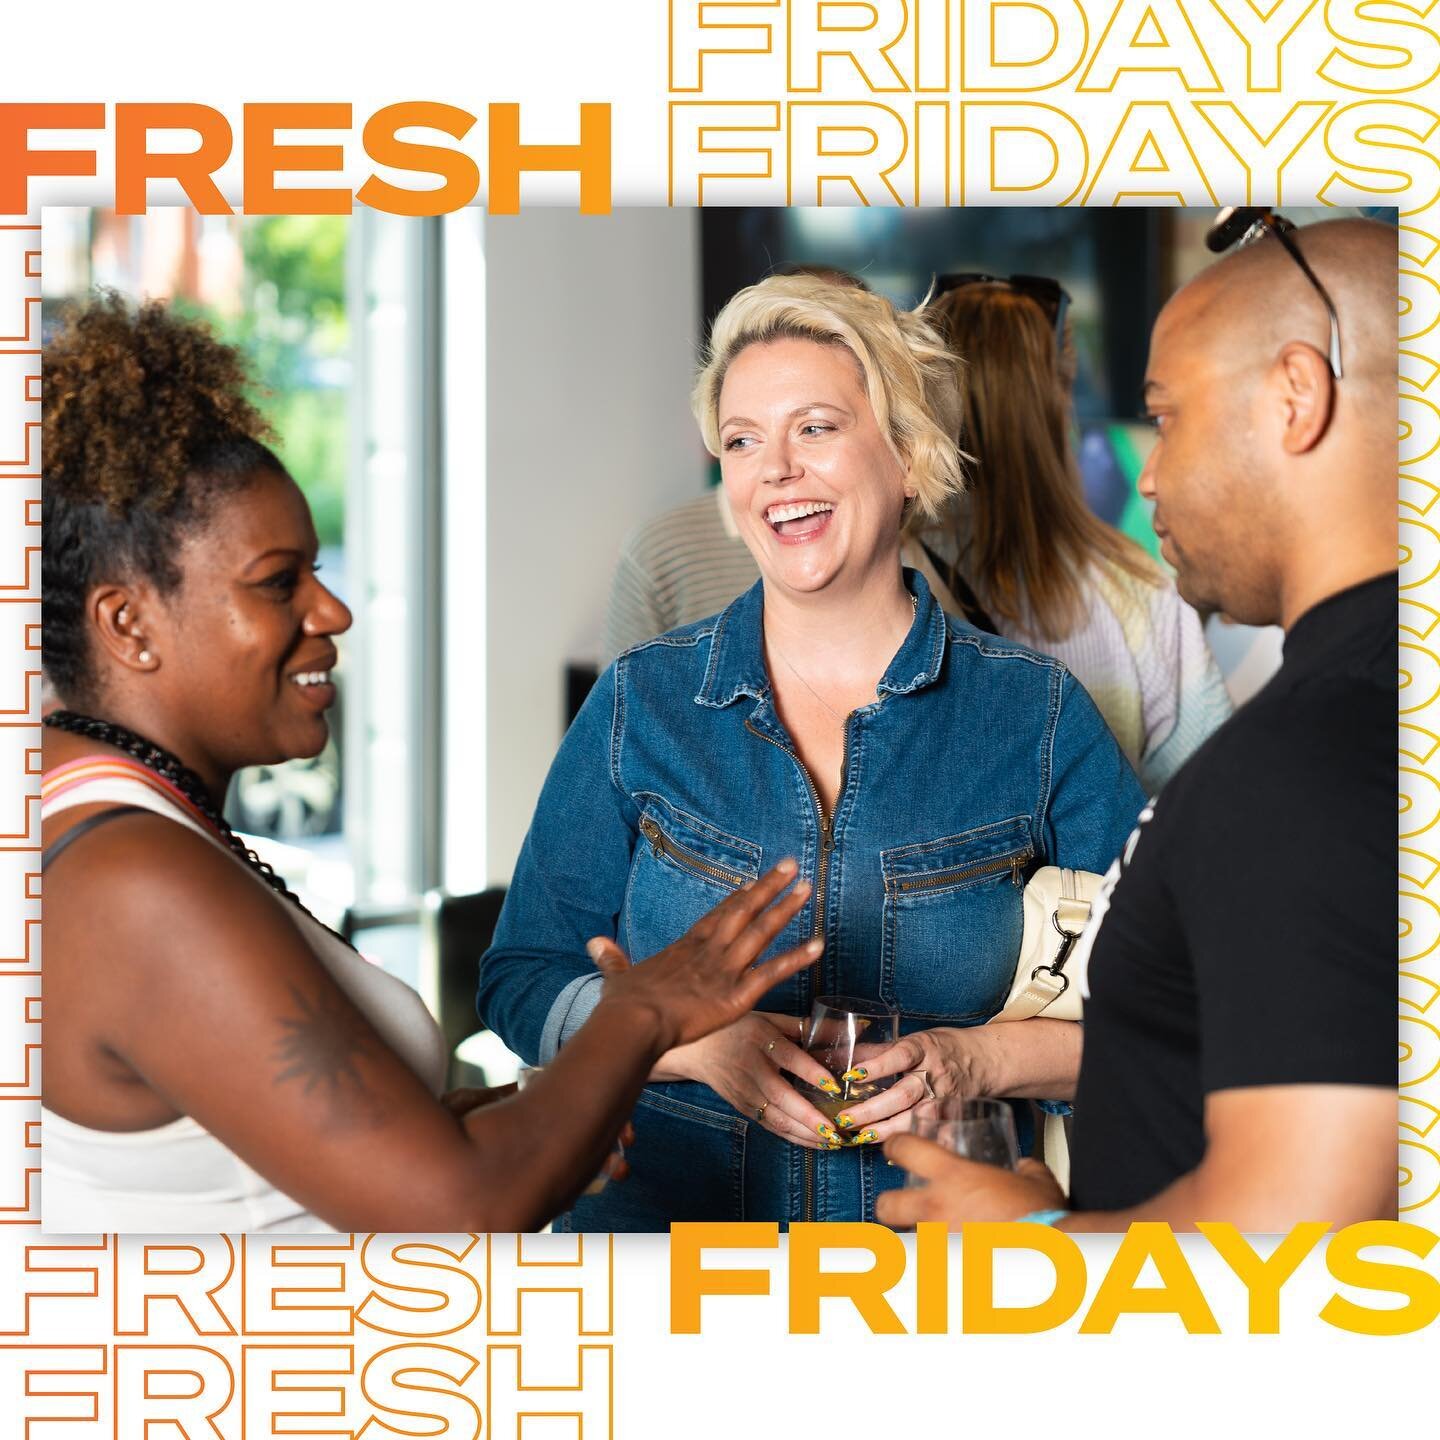 FRESH FRIDAYYYYY! Listen up. Fresh Fridays are about culture making. Connecting unique, amazing people with other unique, amazing people. Ideas are meant to be shared, considered. Worldviews are meant to be refined, understood. If you're not particip